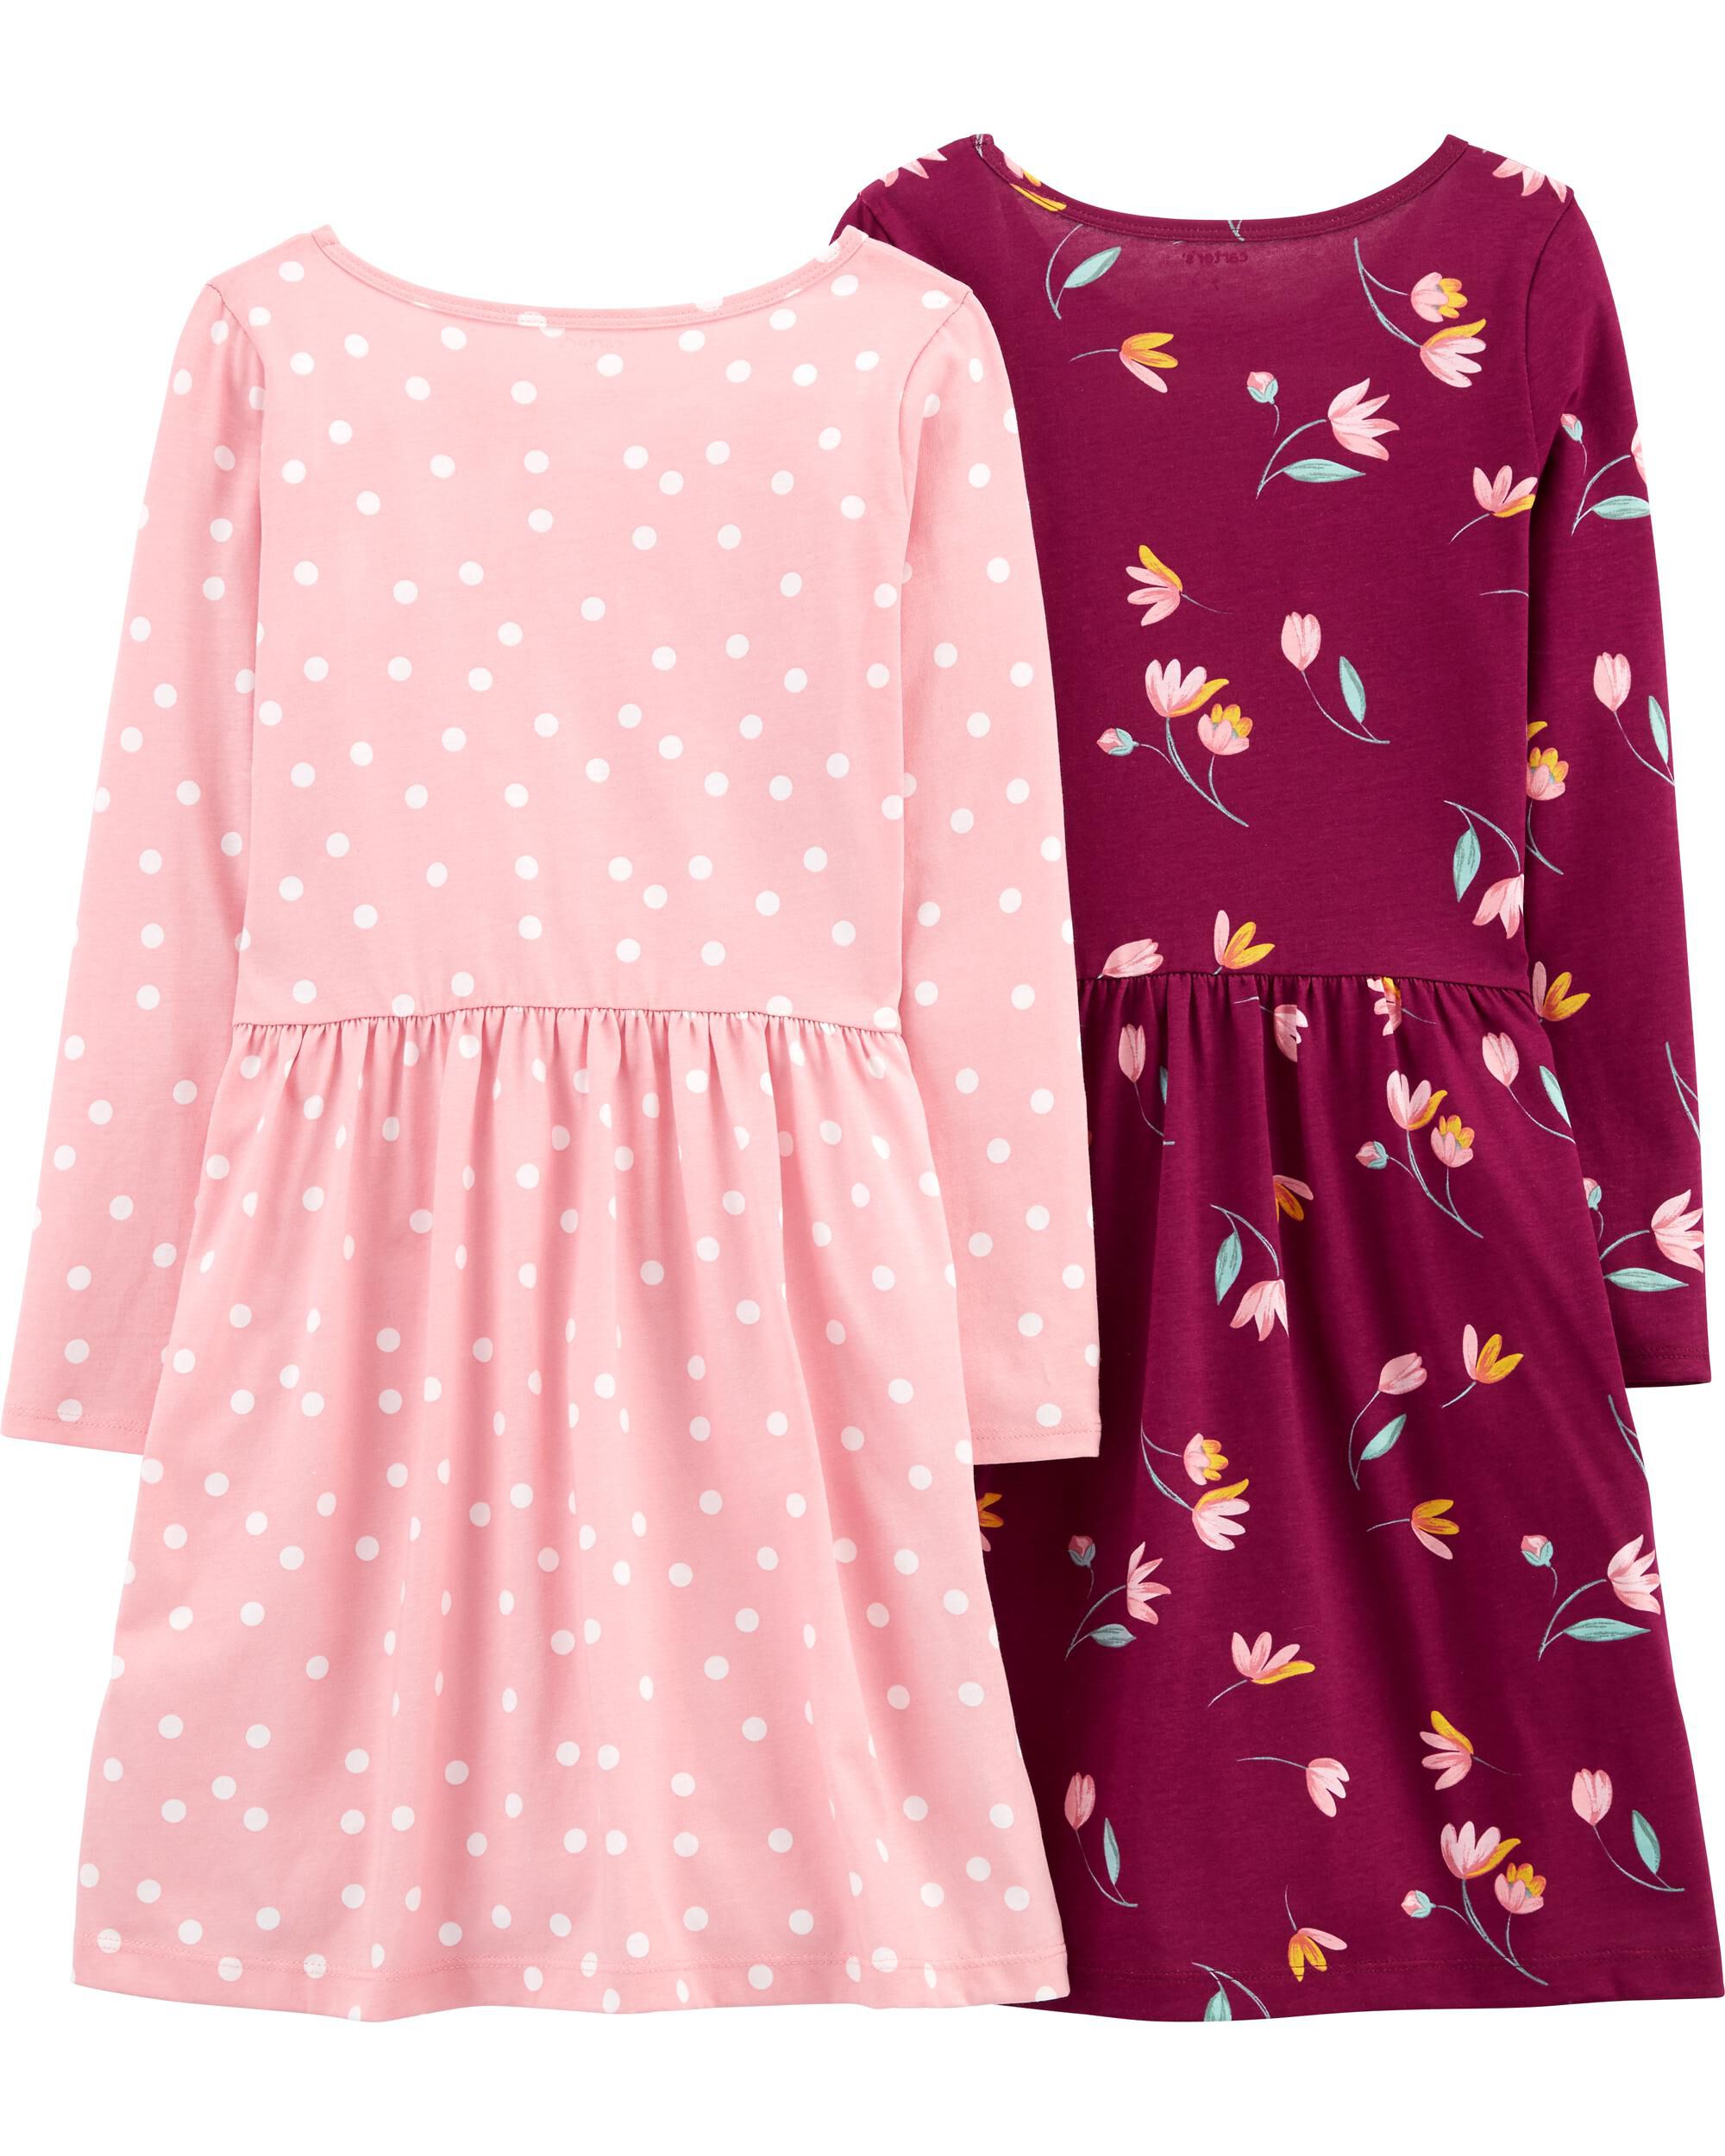 dresses for 5 yr old girl